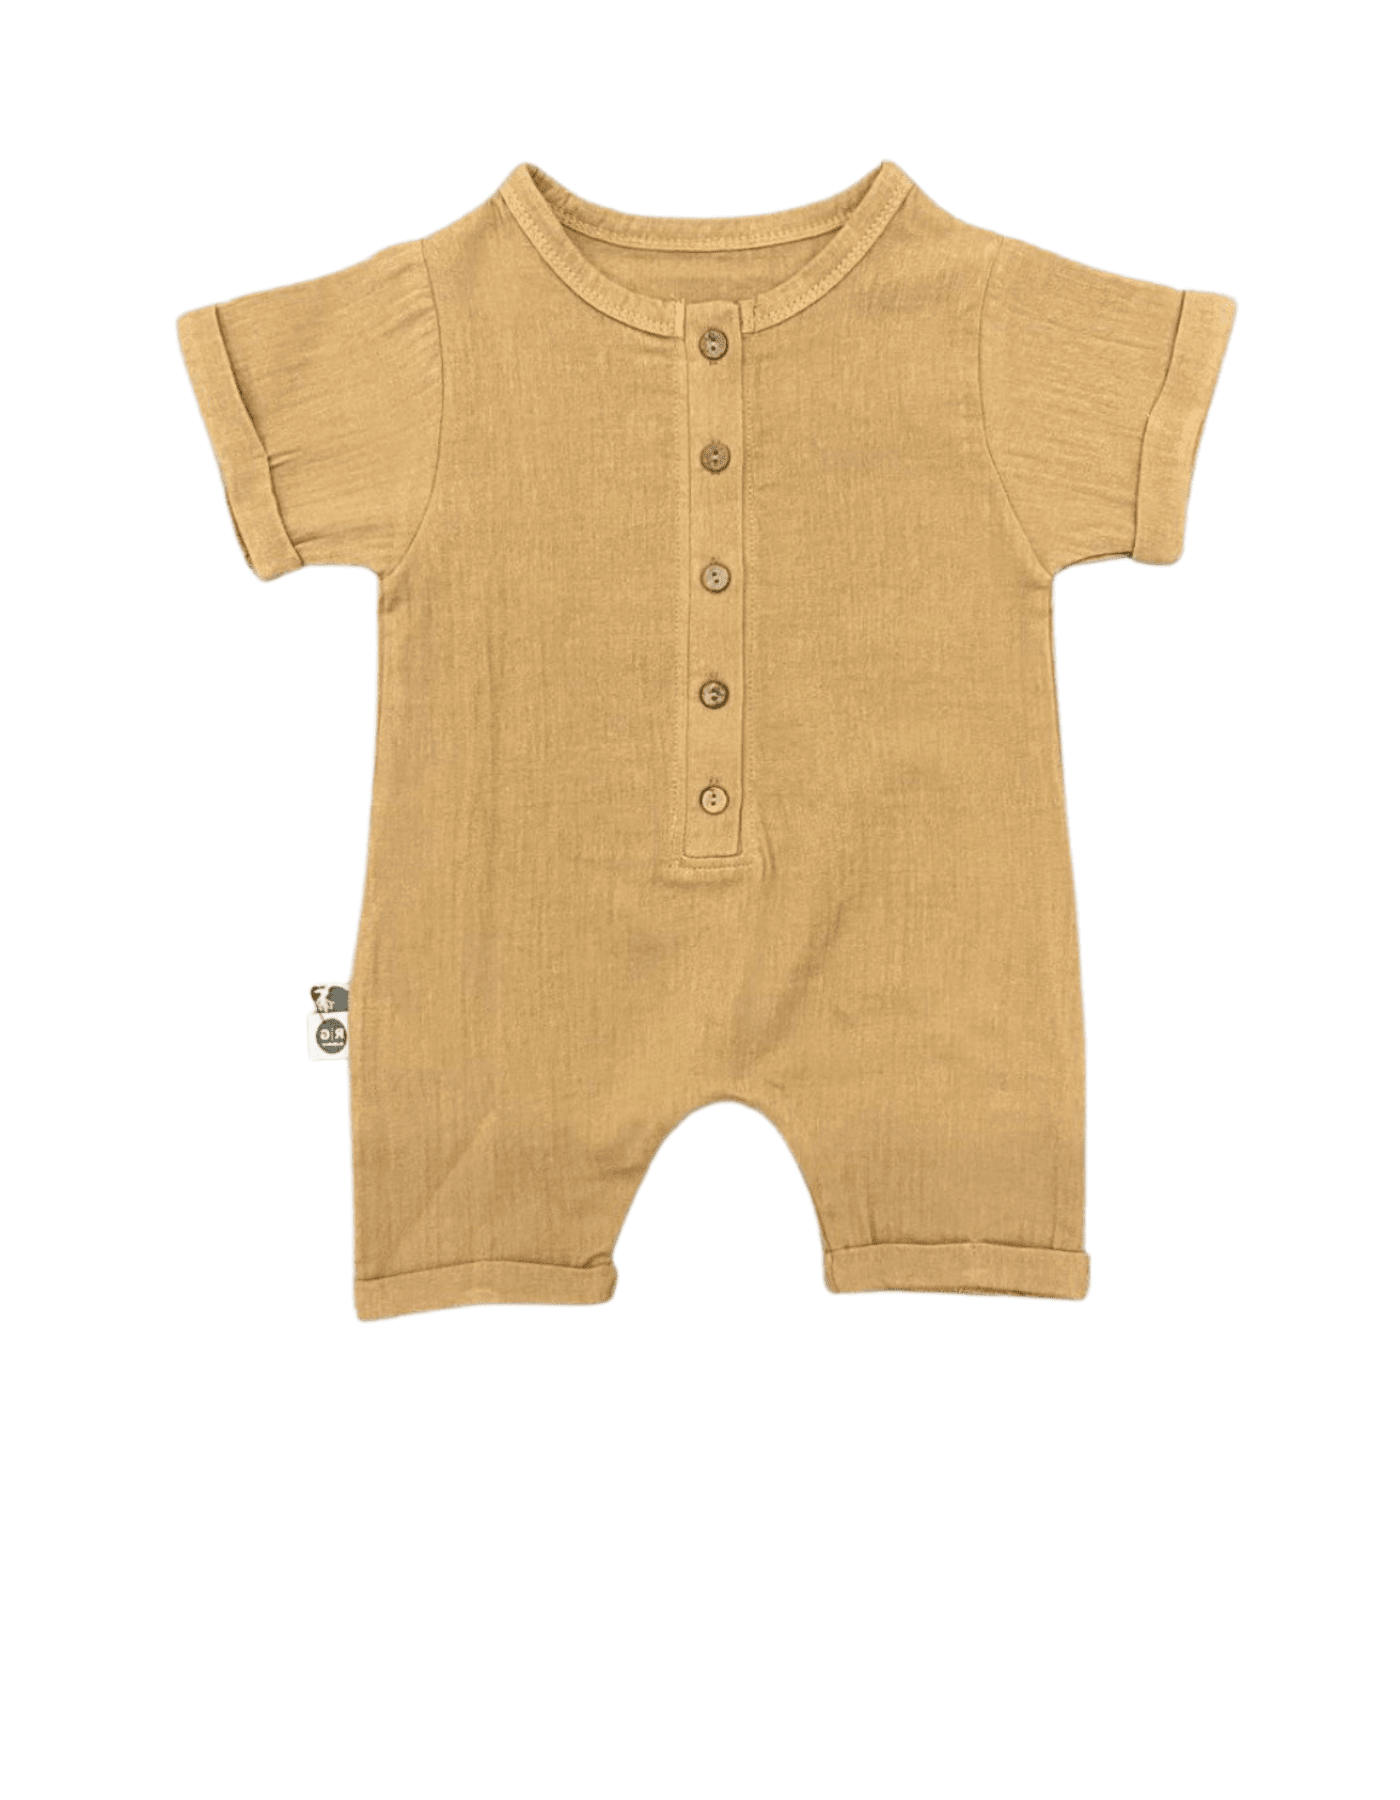 sustainable baby wear